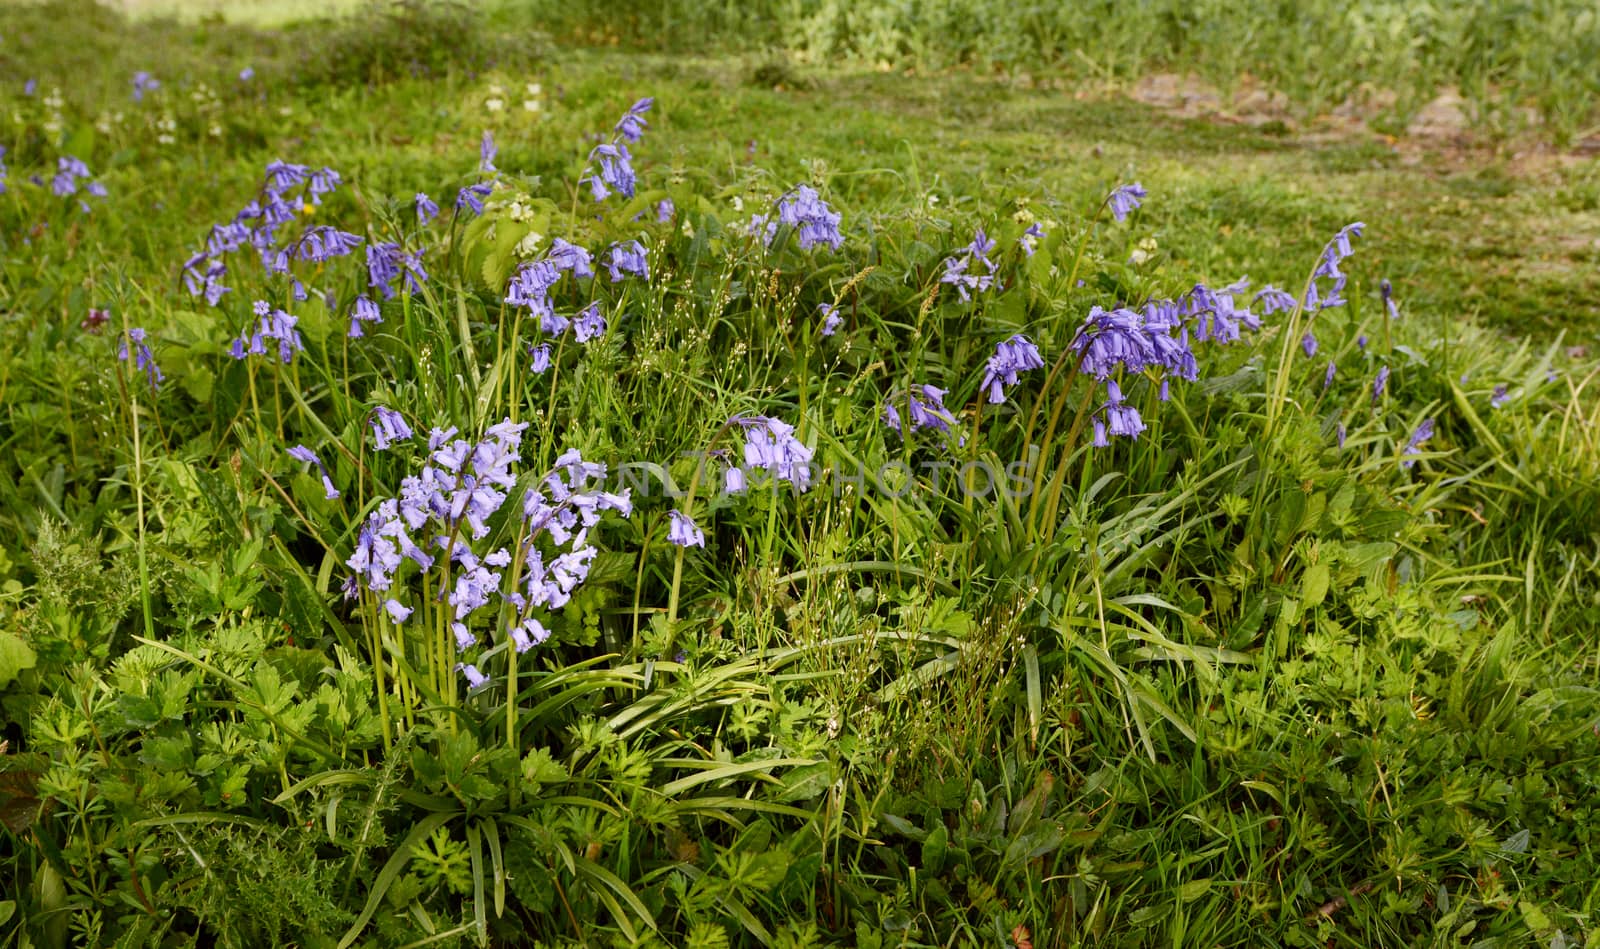 Patch of common bluebells grow in springtime among grass and weeds at the edge of a field